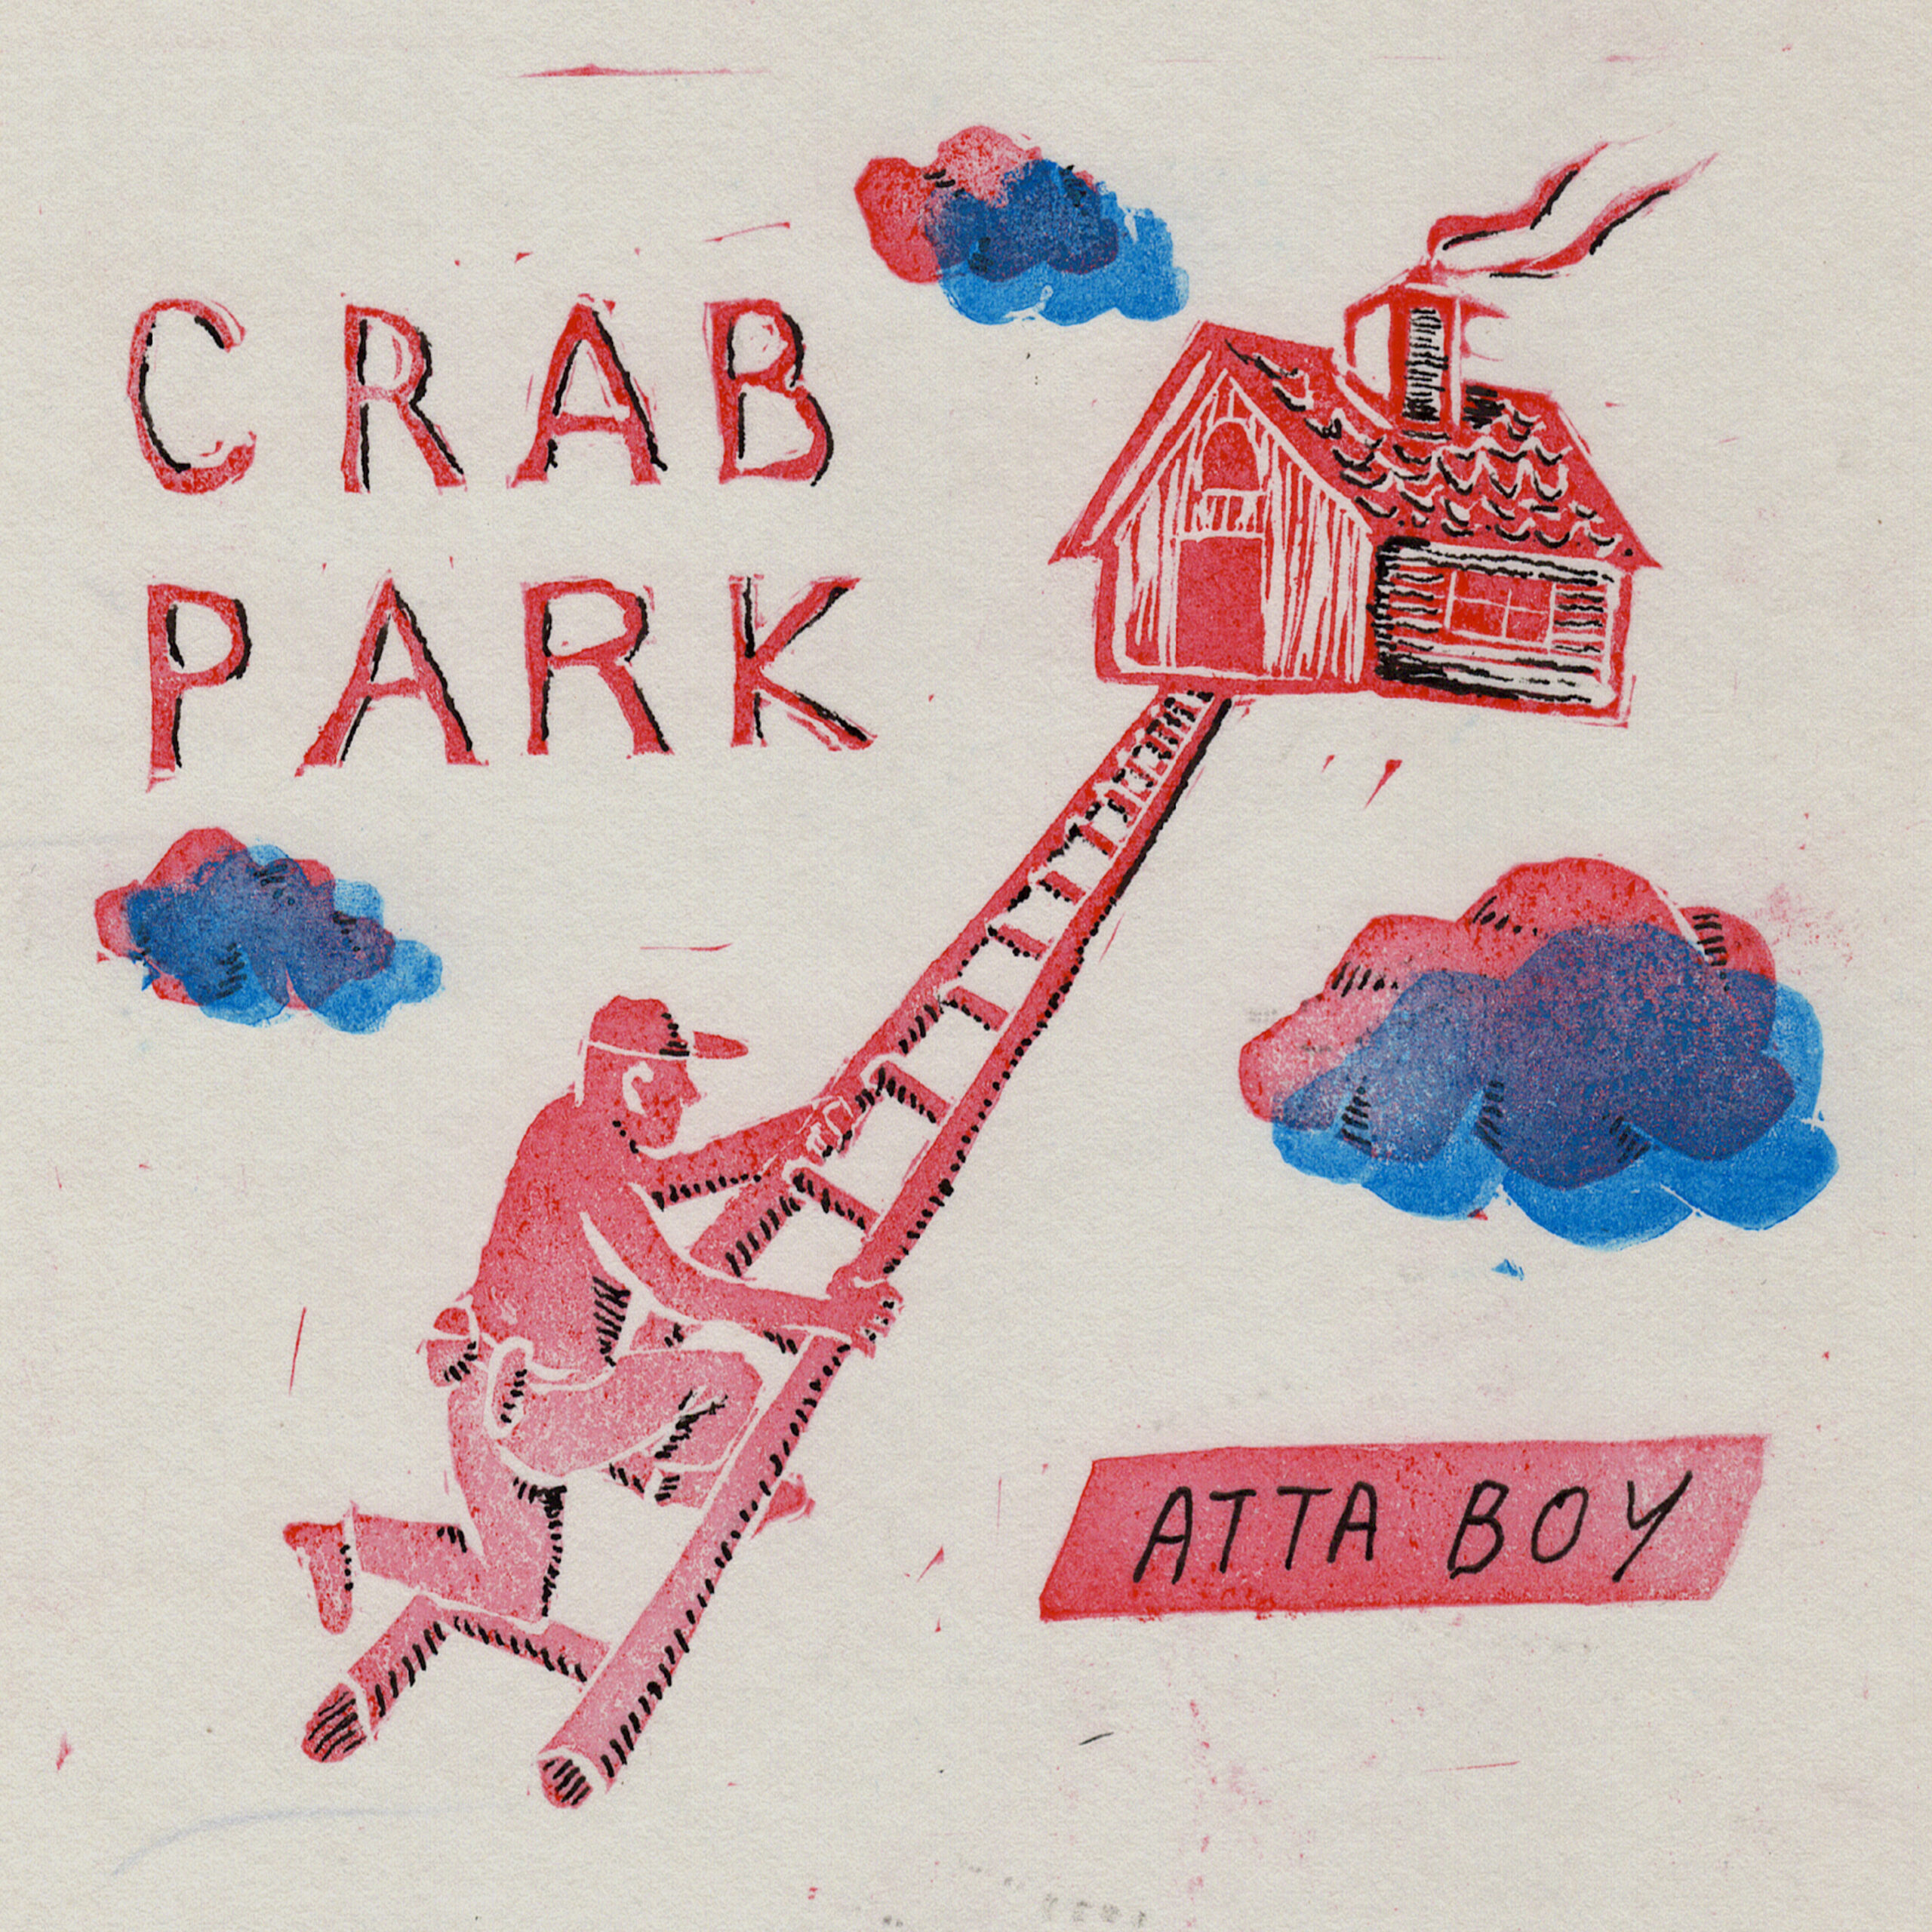 You are currently viewing Atta Boy announce third LP Crab Park & share new single/video ‘Deep Sea Ladder’